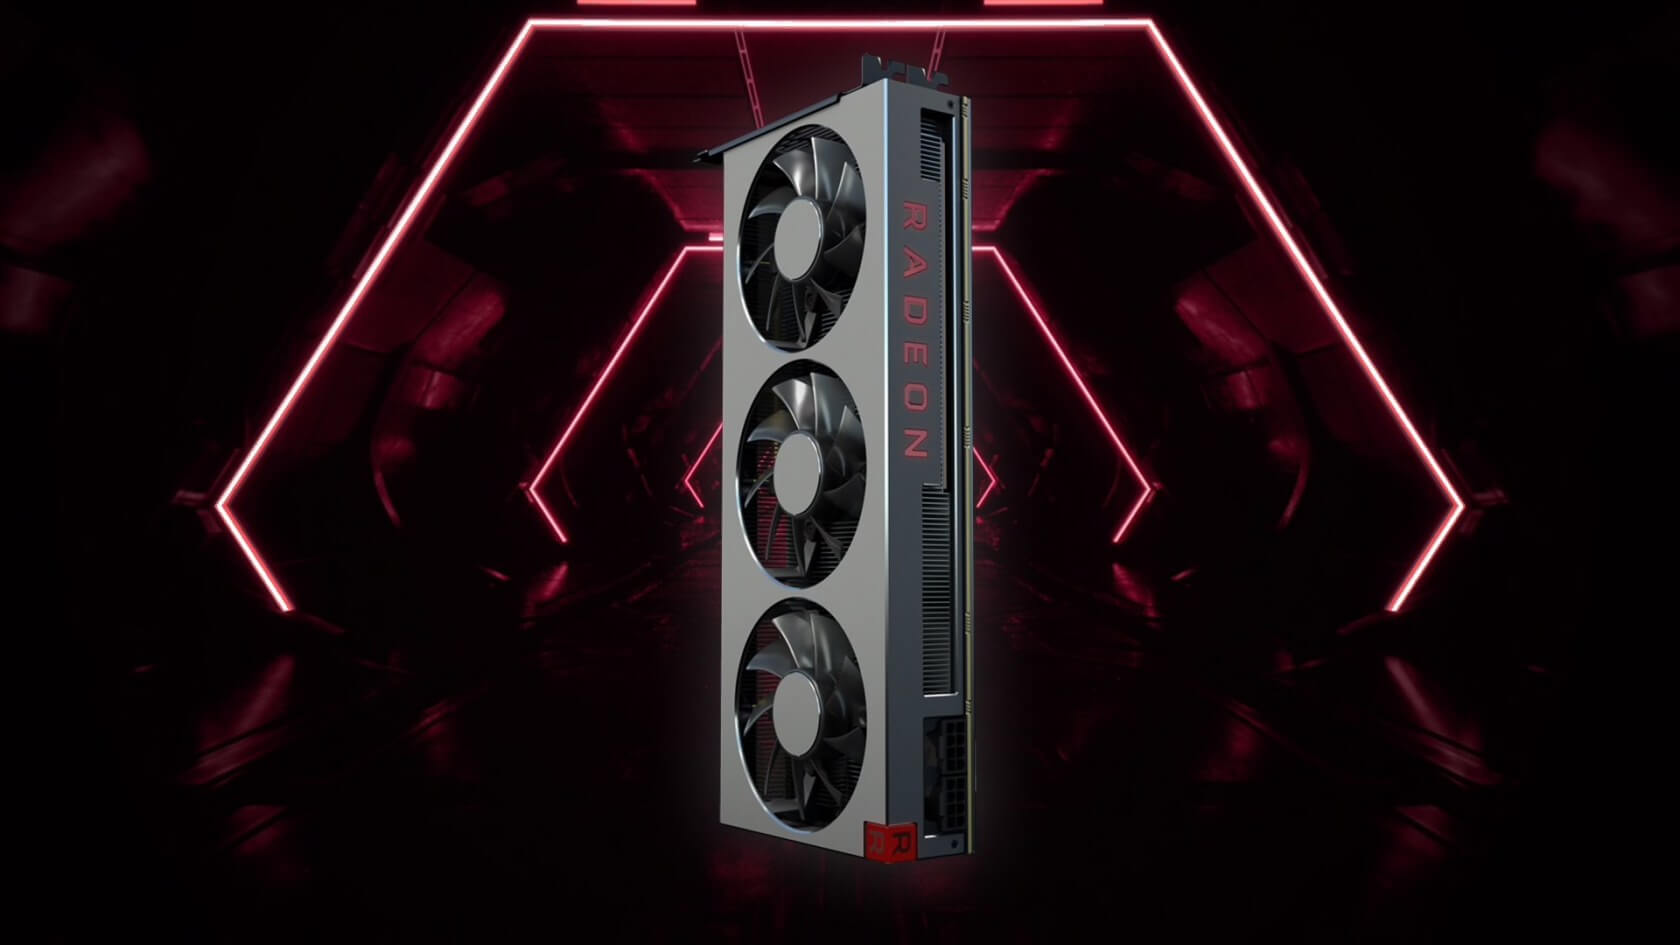 AMD responds to Radeon VII supply rumors, says it expects stock to meet demand